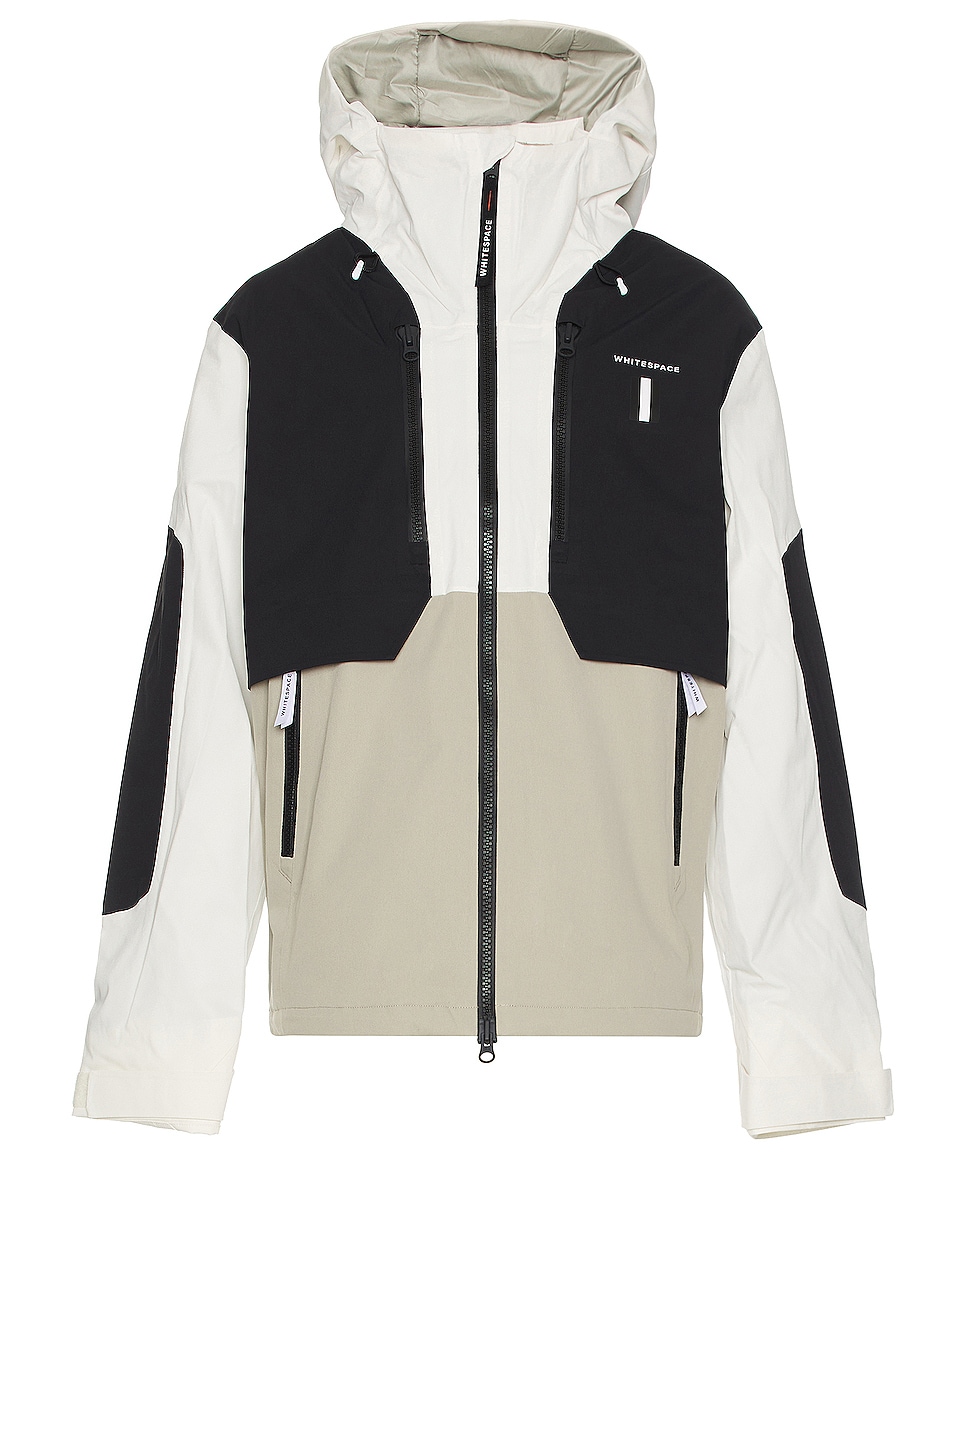 Whitespace 2l Insulated Cargo Jacket in White